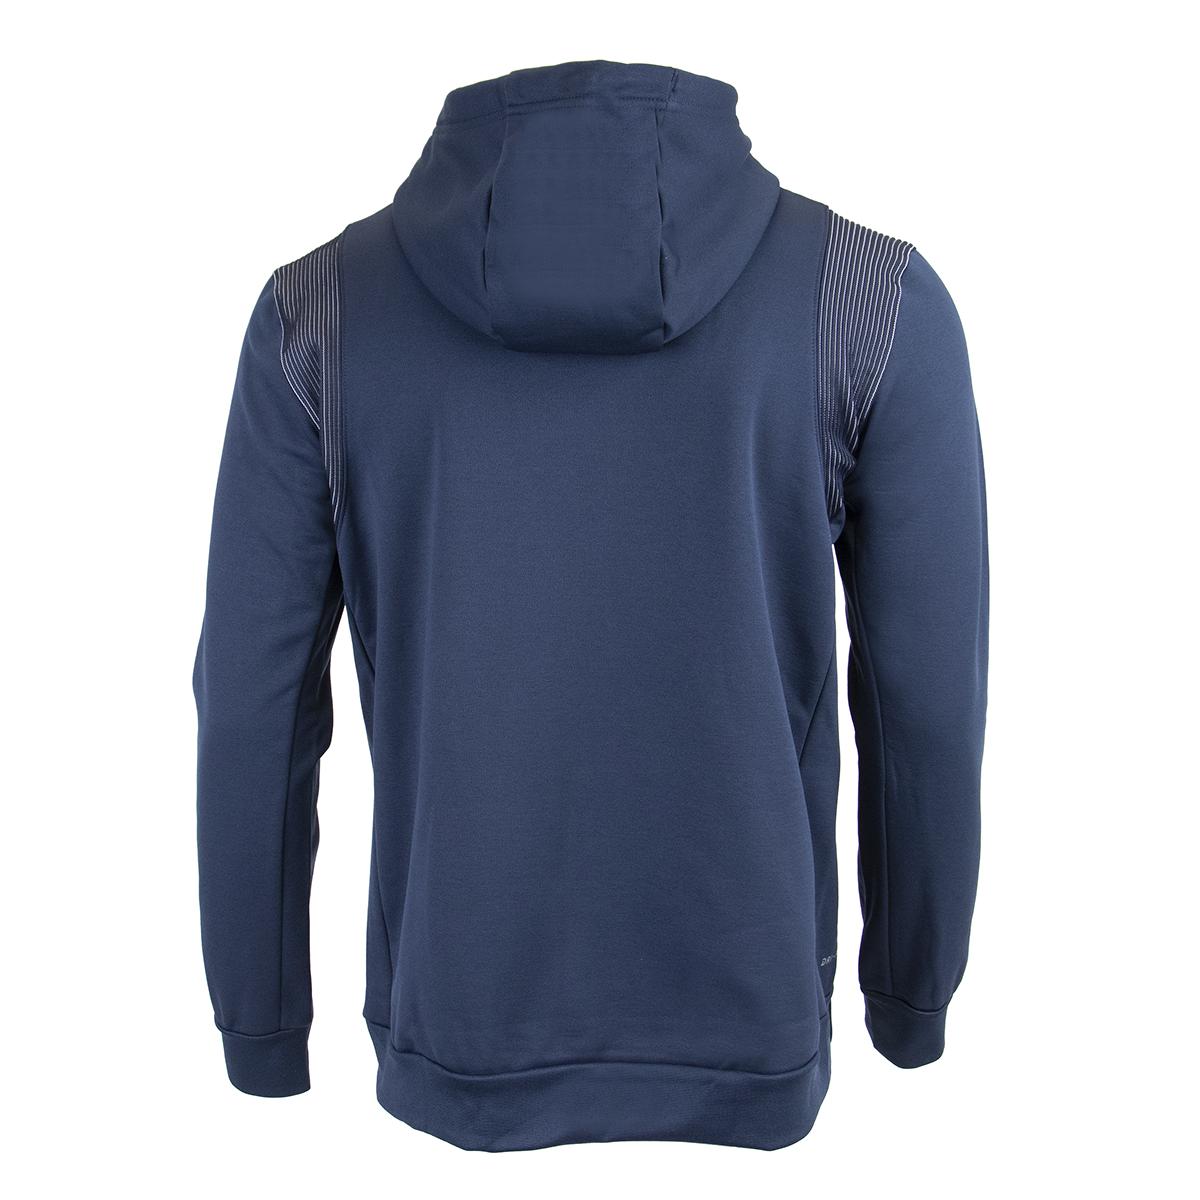 Barstool Sports Nike Therma Football Pullover Hoodie-Hoodies-Barstool Sports-Barstool Sports